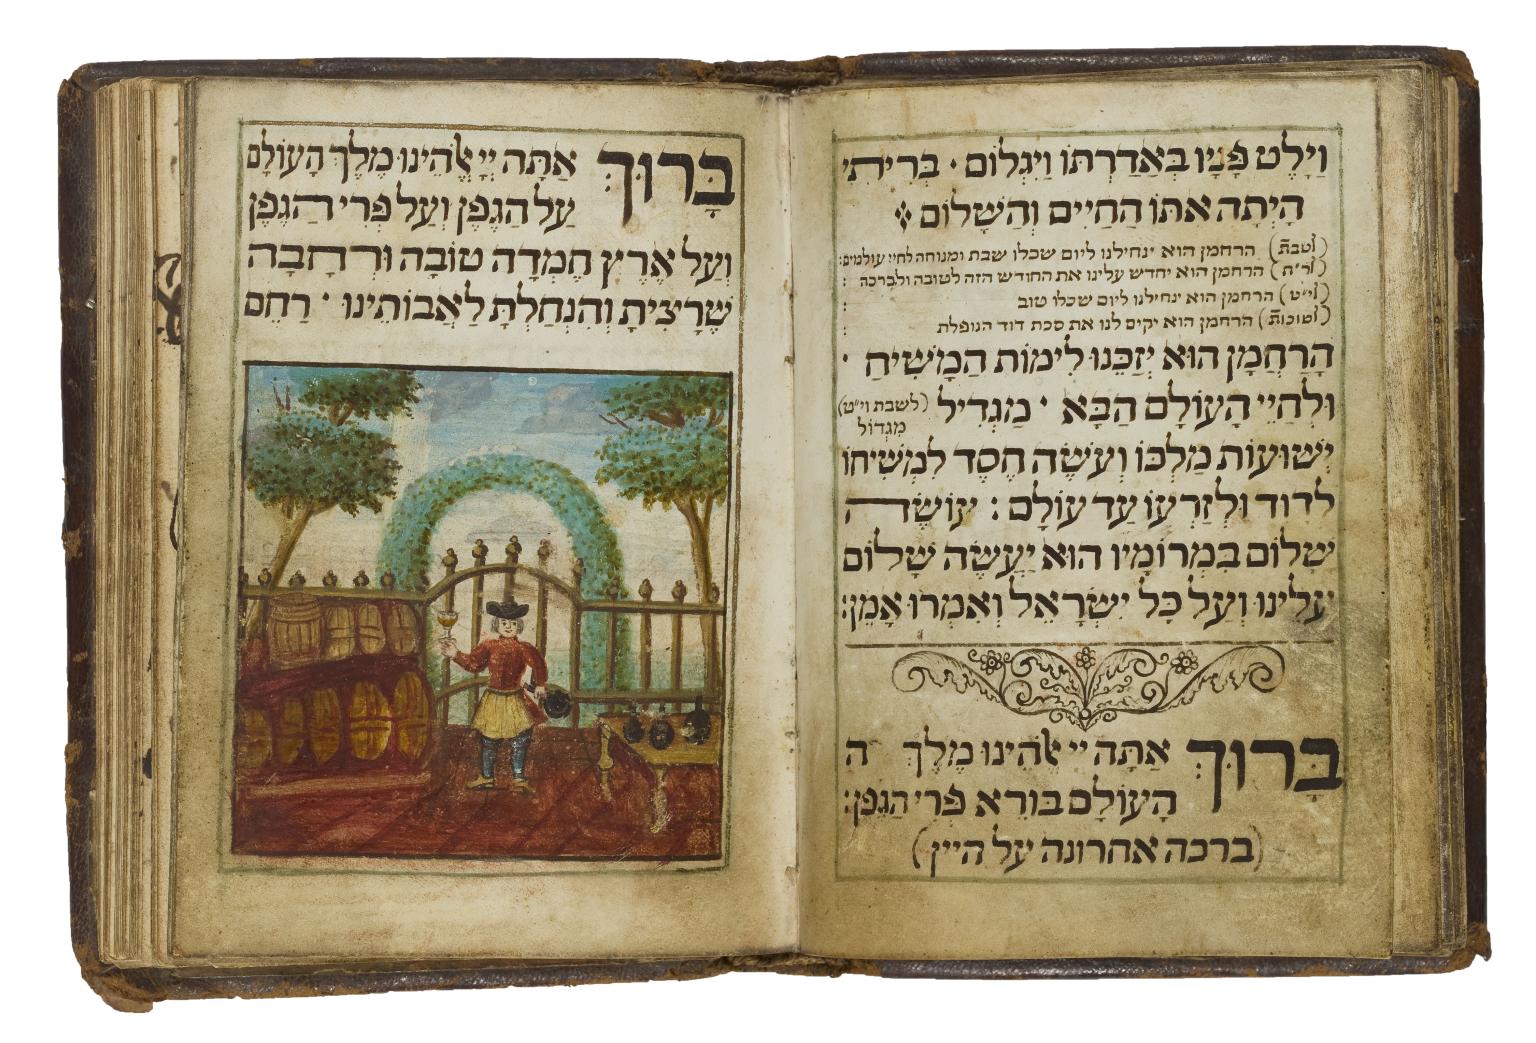 Facing-page manuscript with Hebrew text on right-hand page and illustration on left-hand page of man holding wine glass next to wine barrels under Hebrew text.